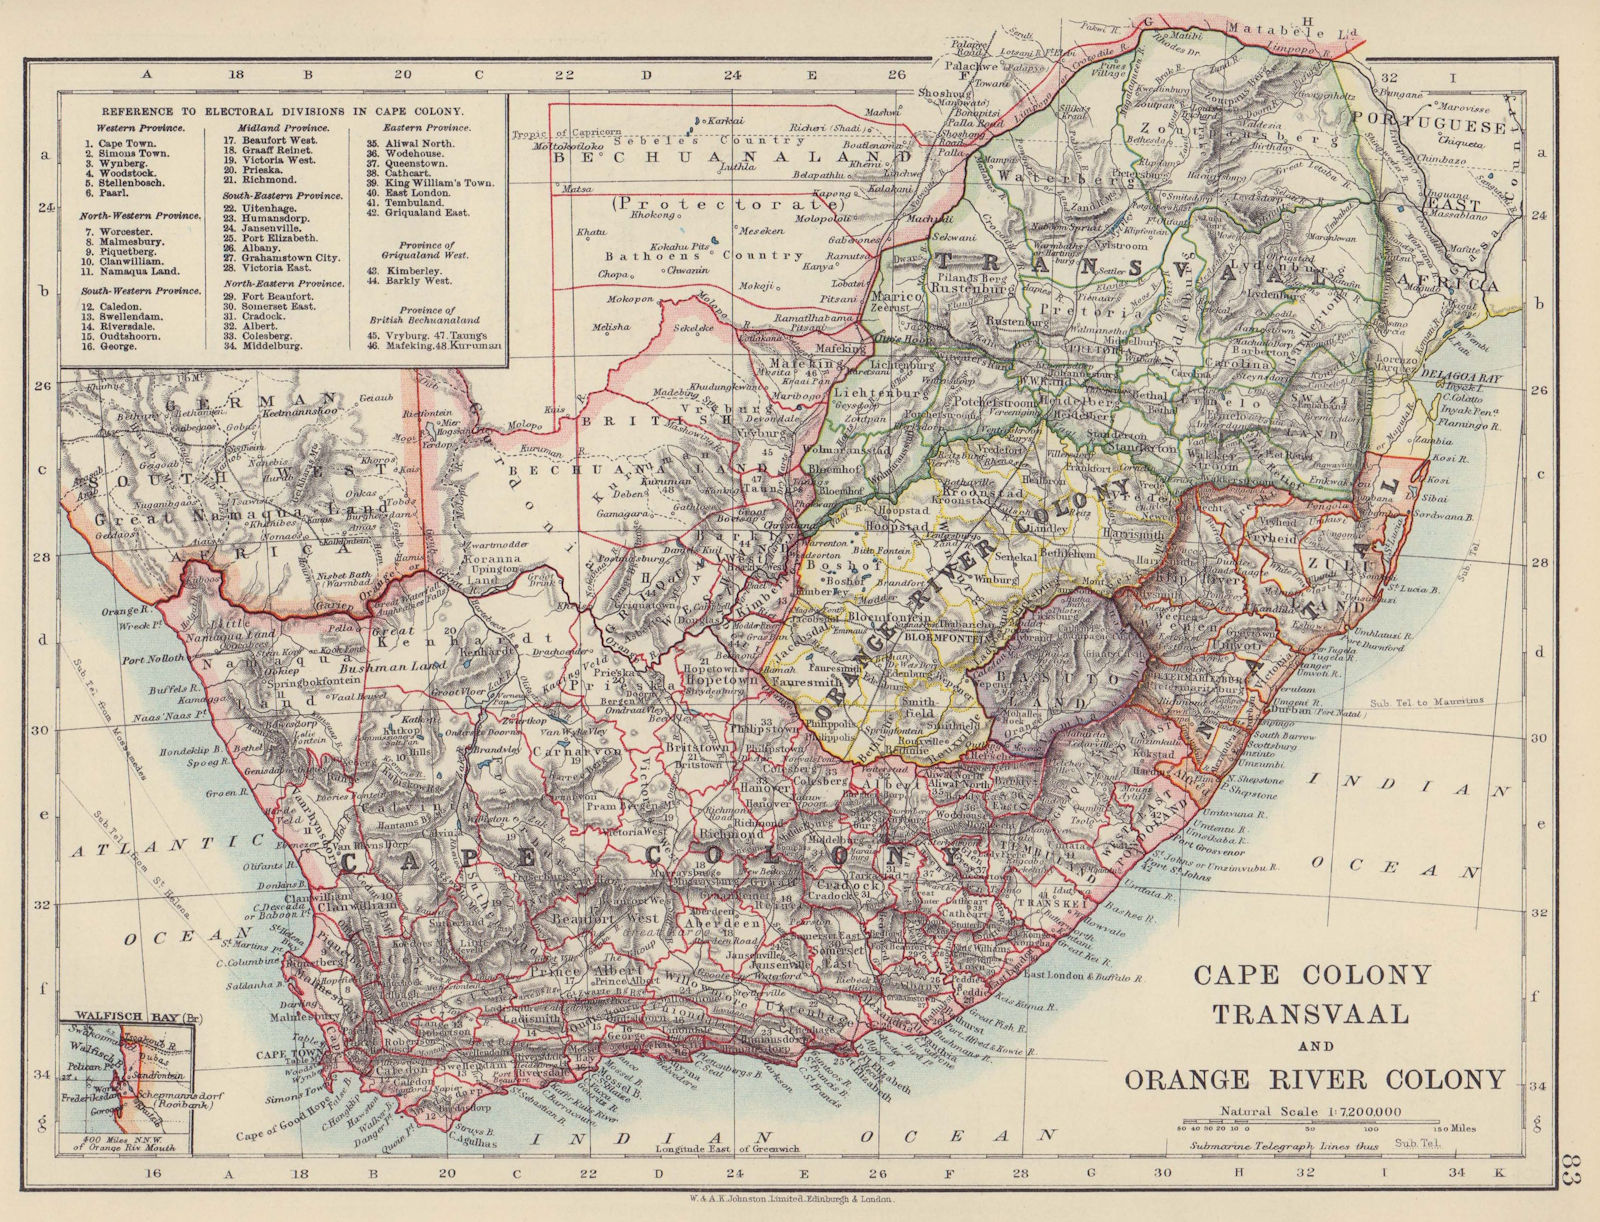 COLONIAL SOUTH AFRICA. Cape Colony. Orange River Colony. Transvaal 1910 map